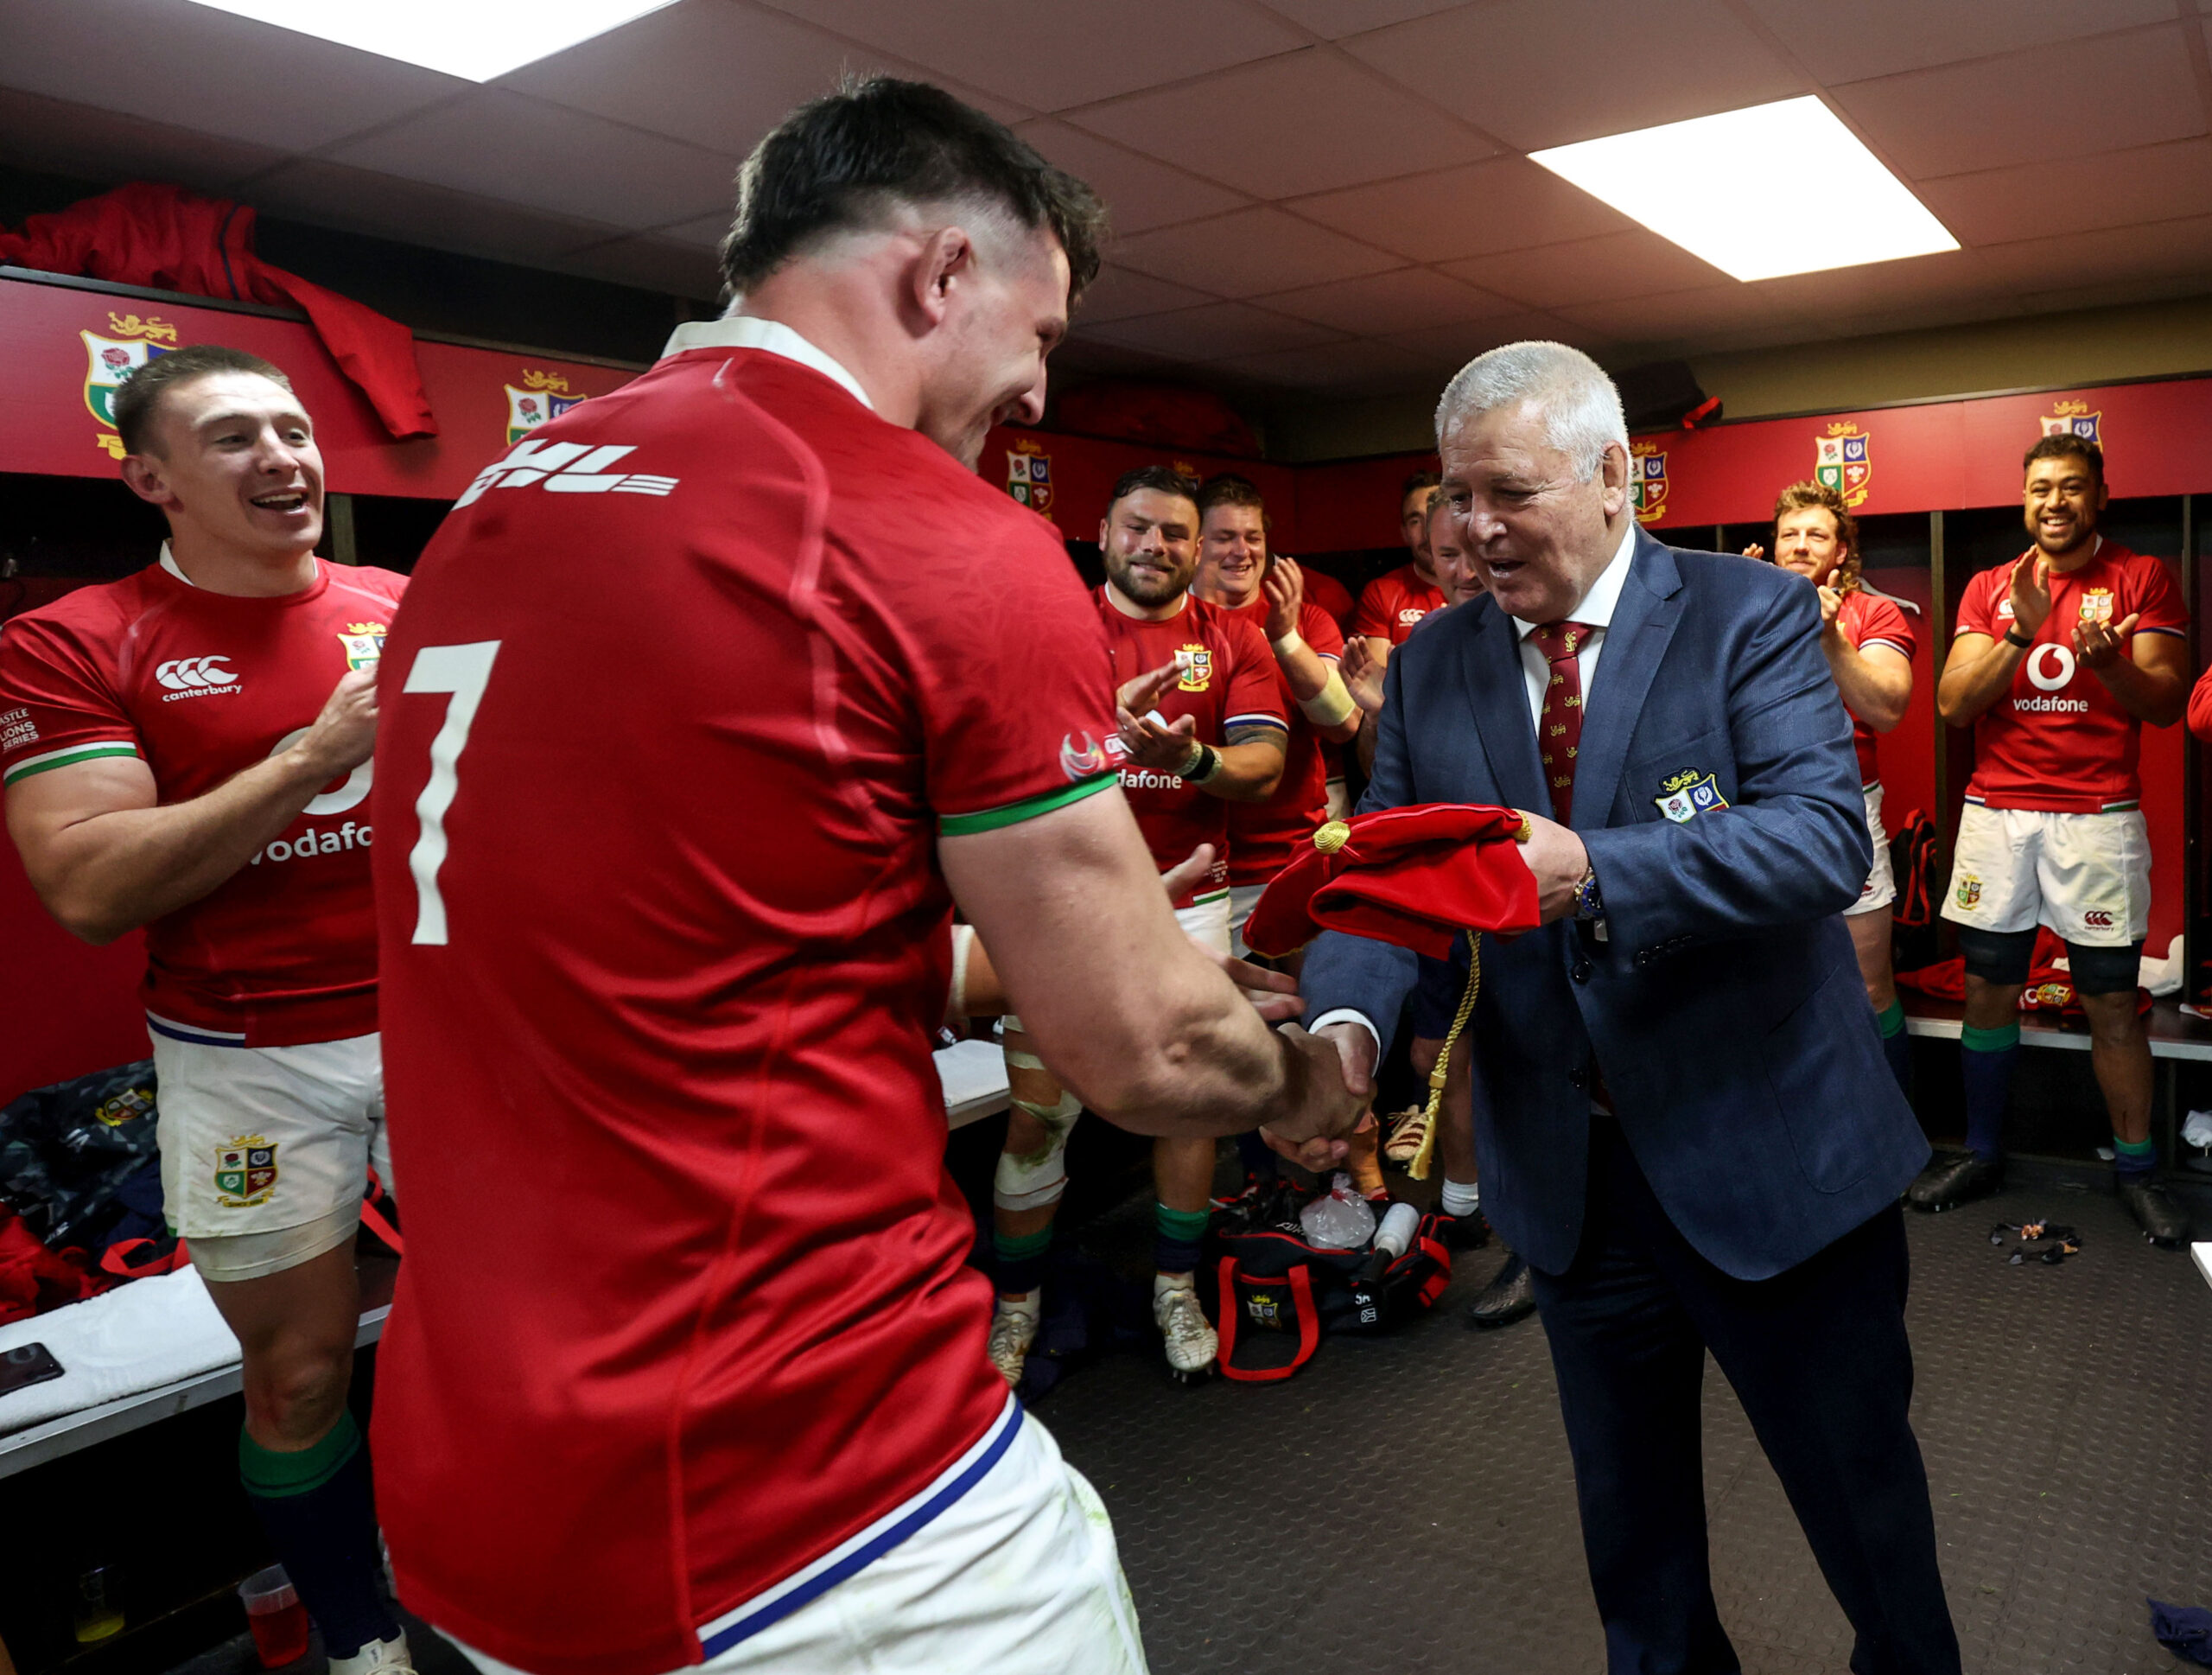 Warren Gatland presenting Tom Curry's Lions Honour Cap, with Josh Adams, Tadhg Furlong, Taulupe Faletau and others applauding.